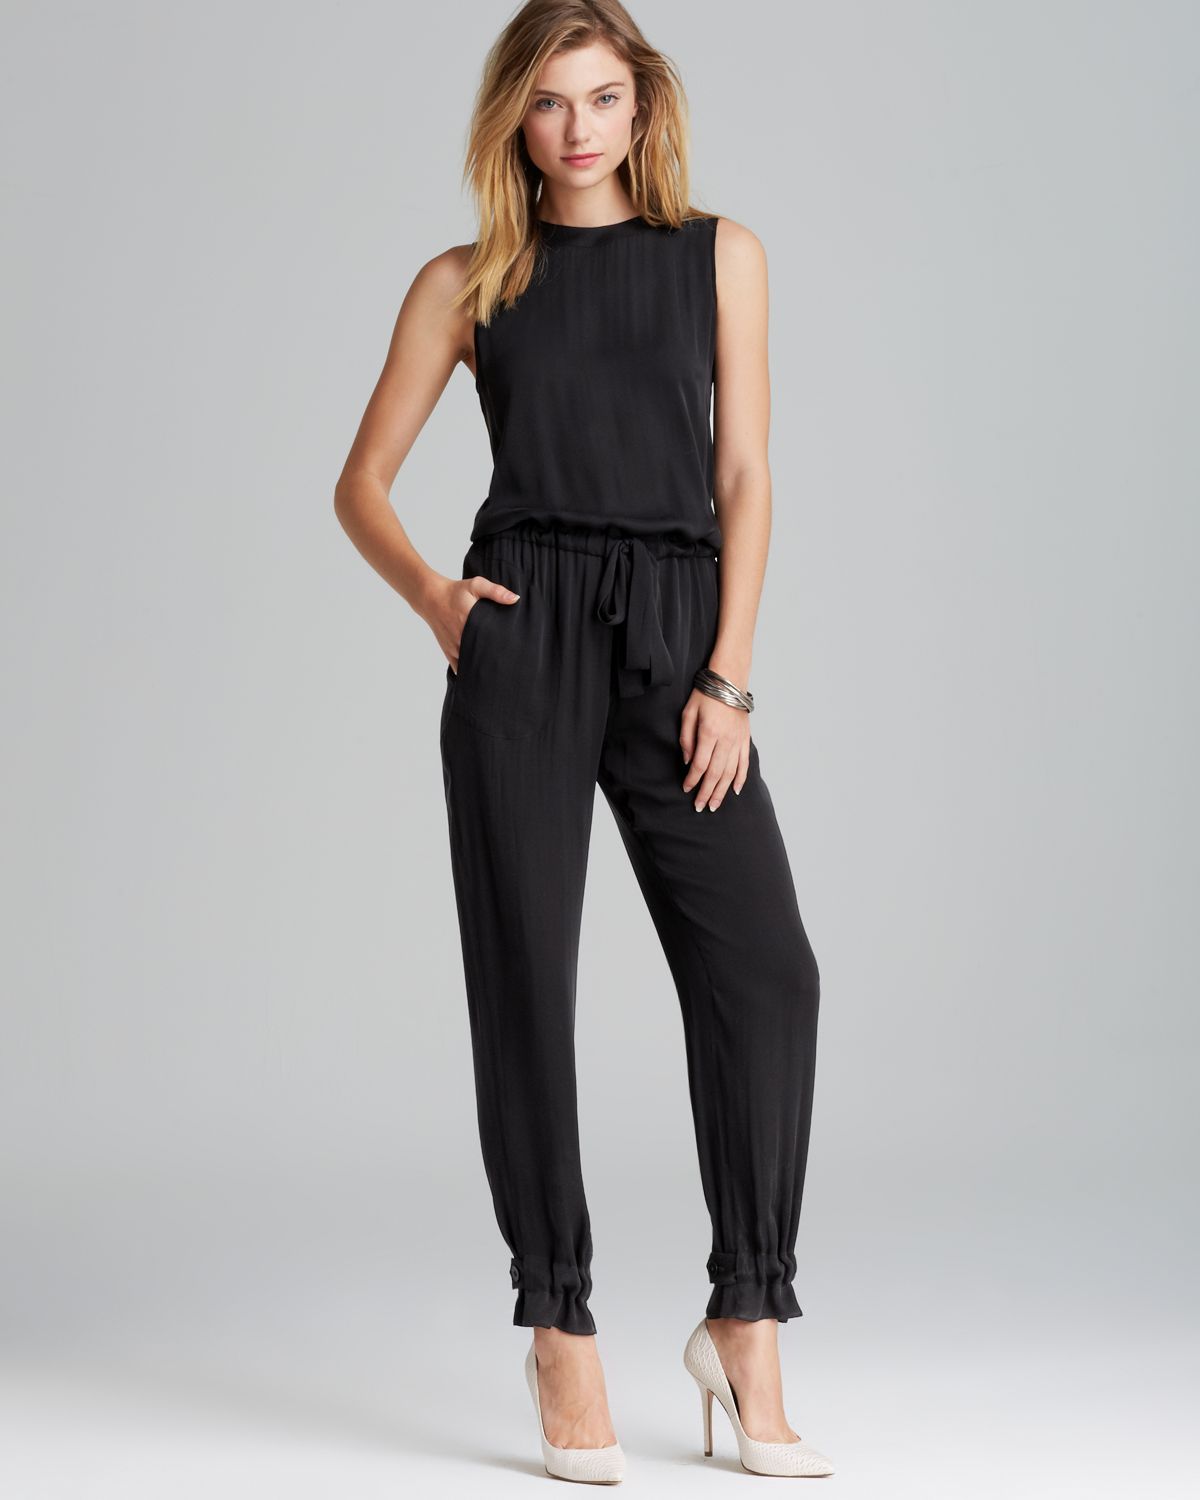 Lyst - Theory Hendrina Double Georgette Jumpsuit in Black